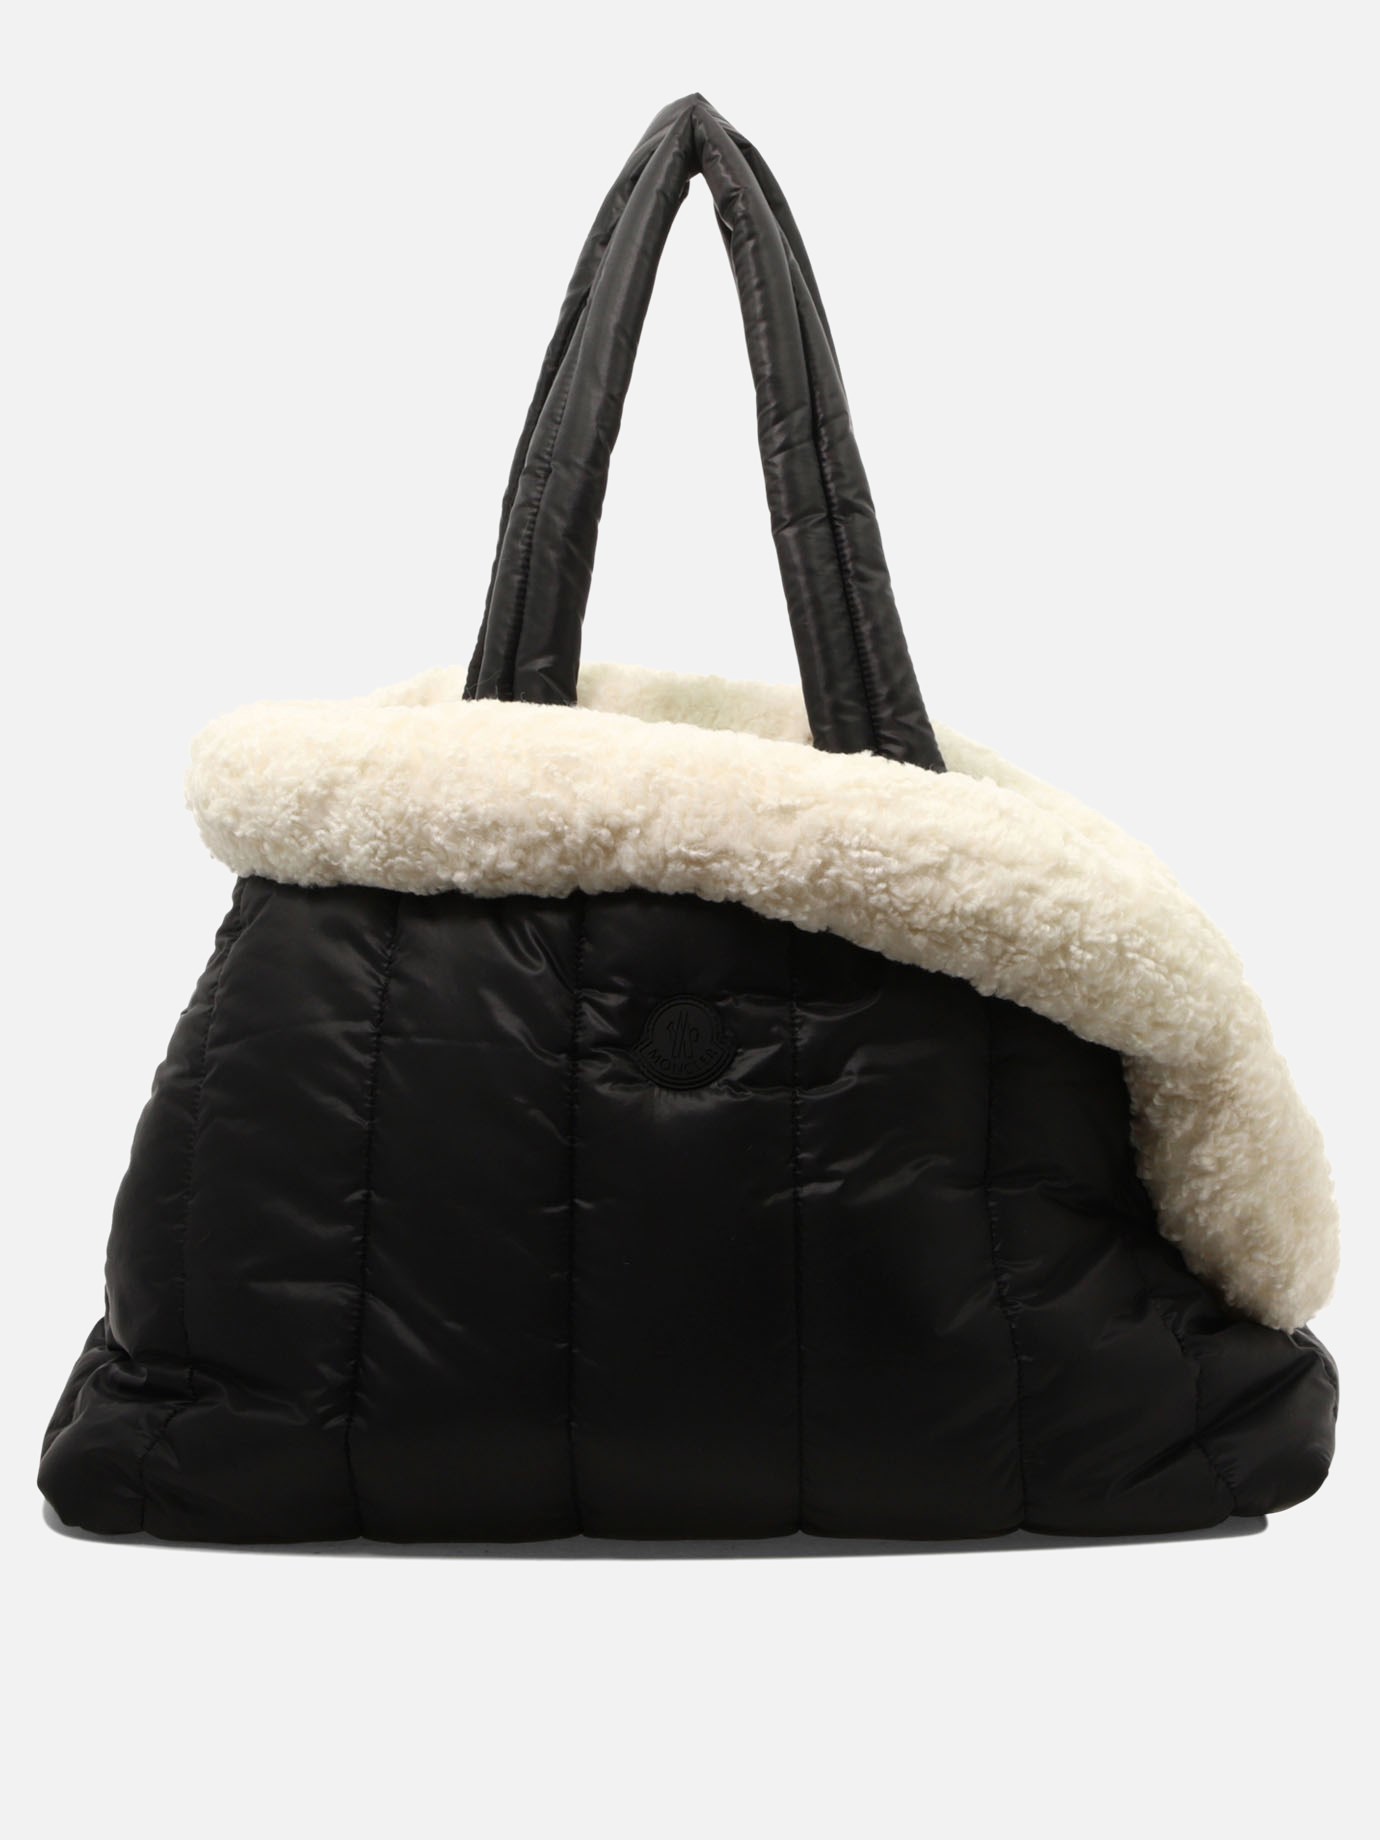 Bag with removable interiorby Moncler Poldo - 5